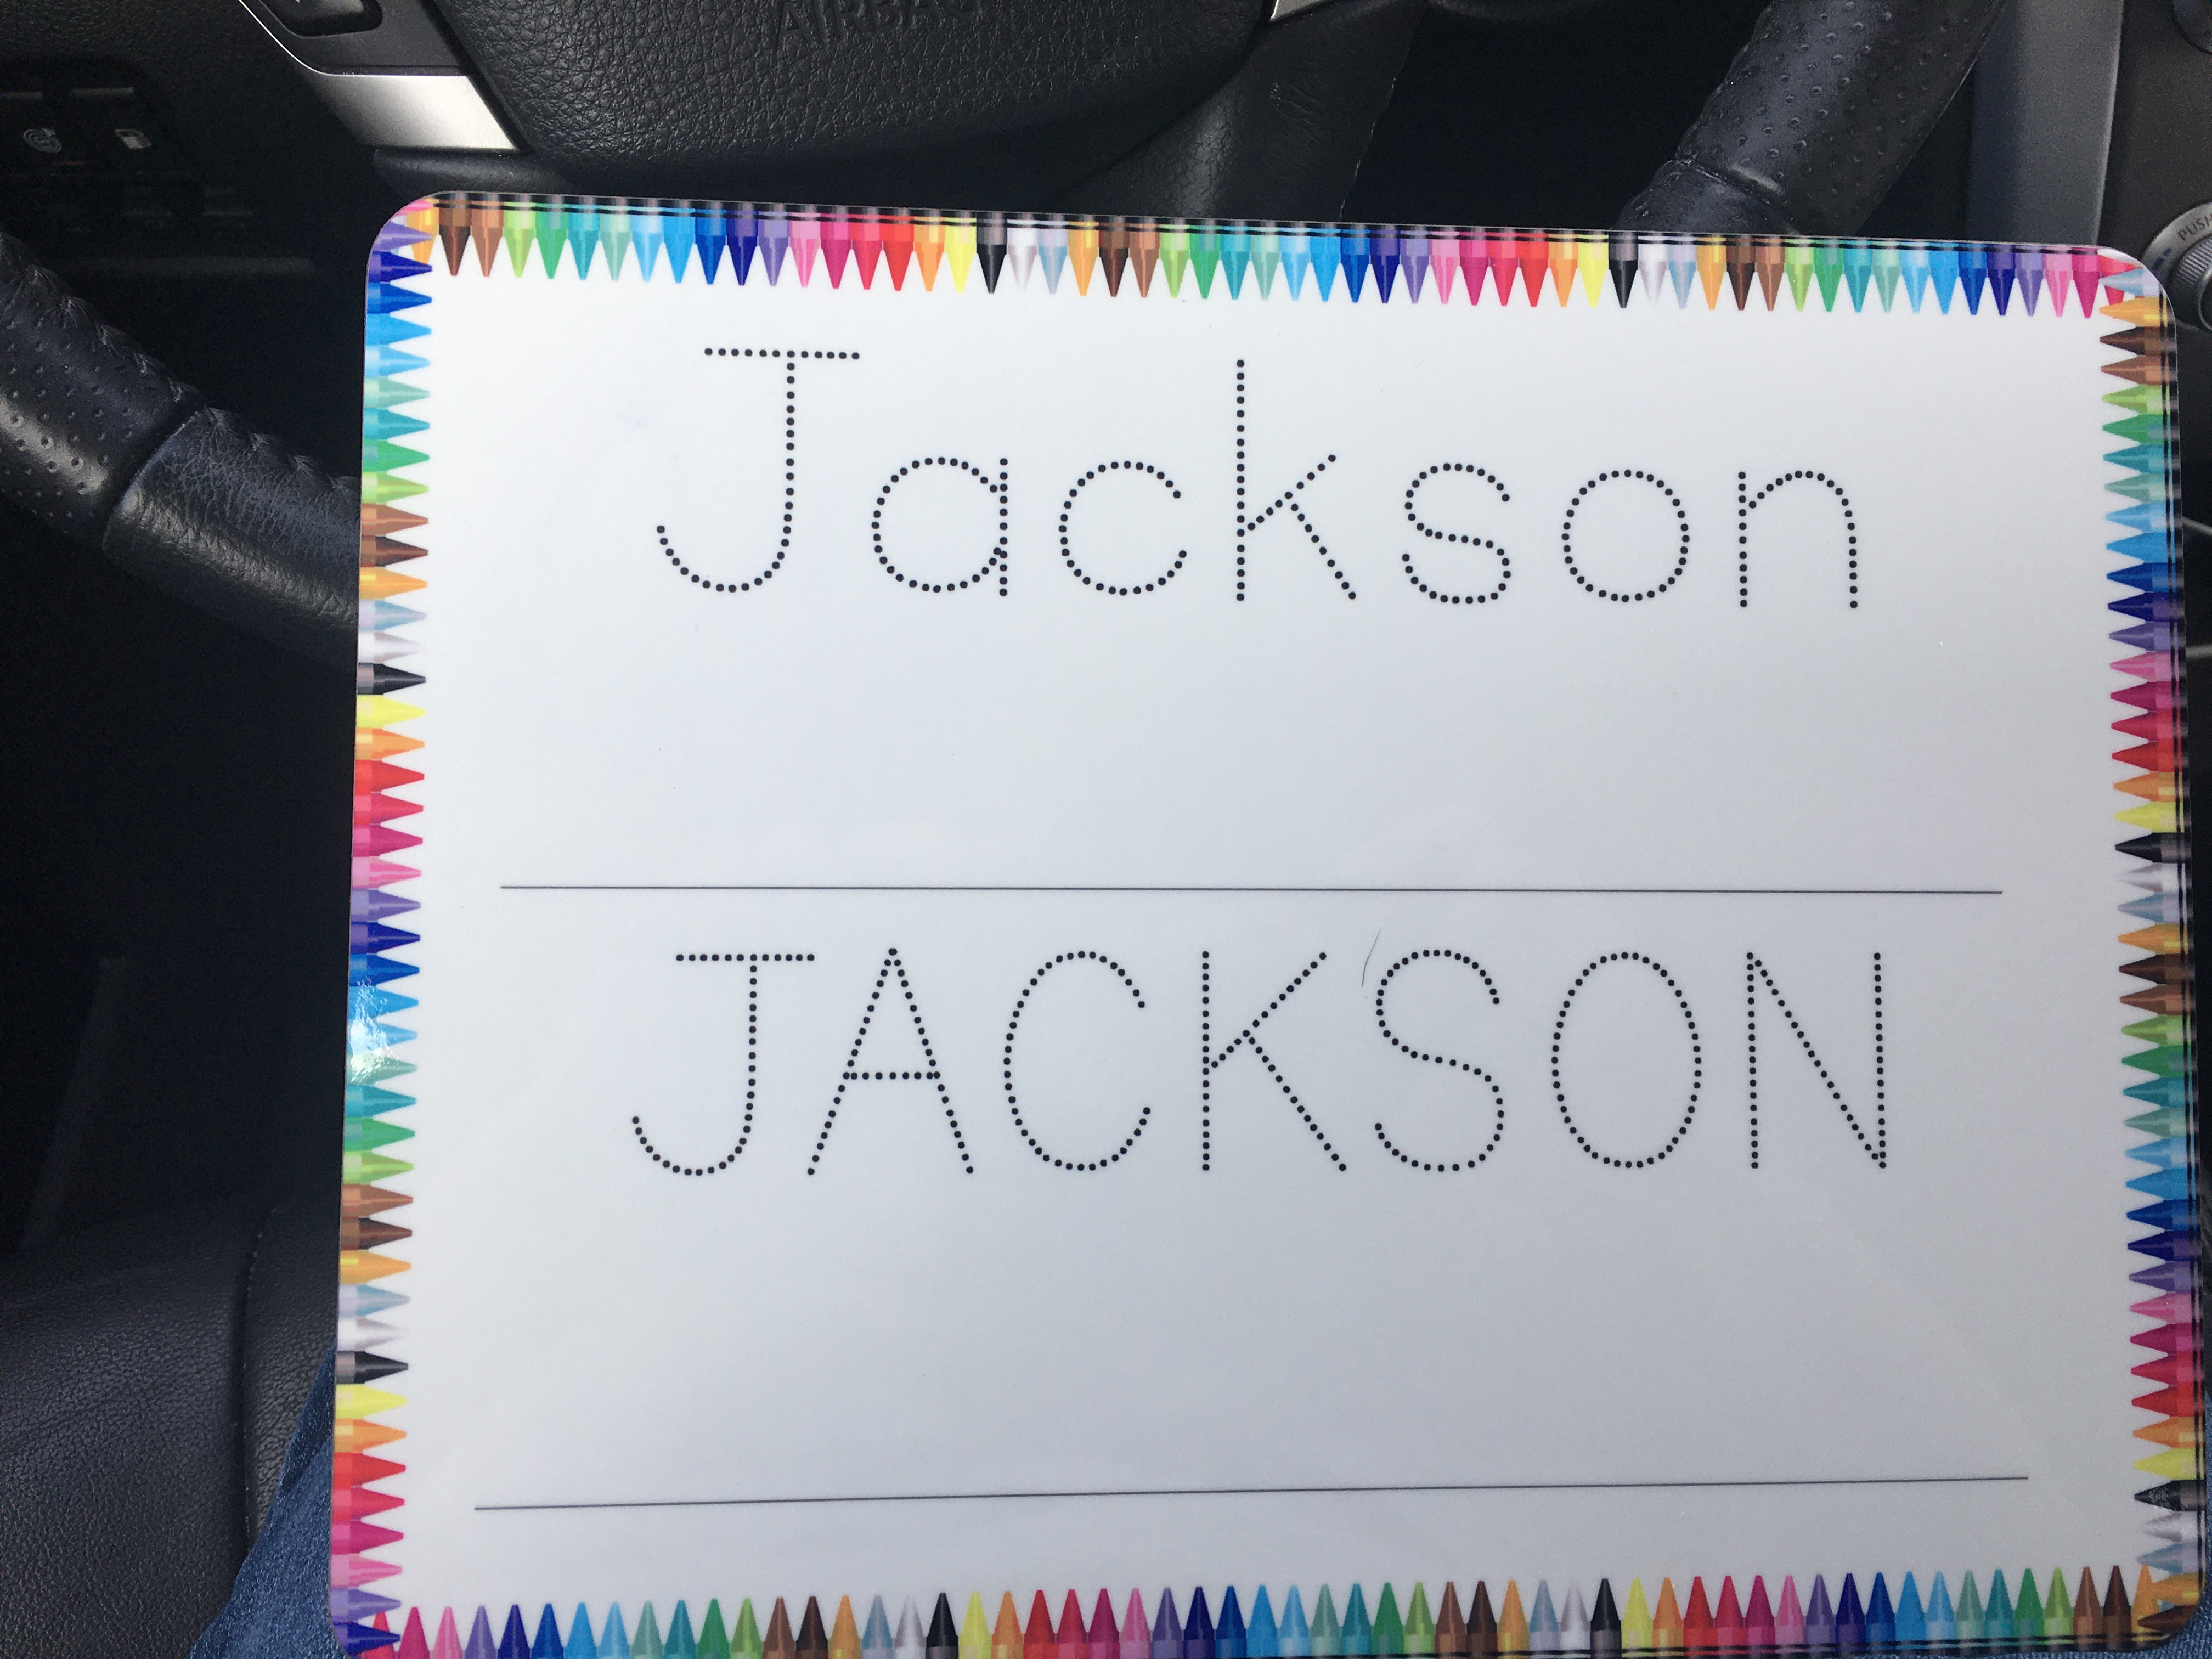 Pre-K Name Board made with sublimation printing